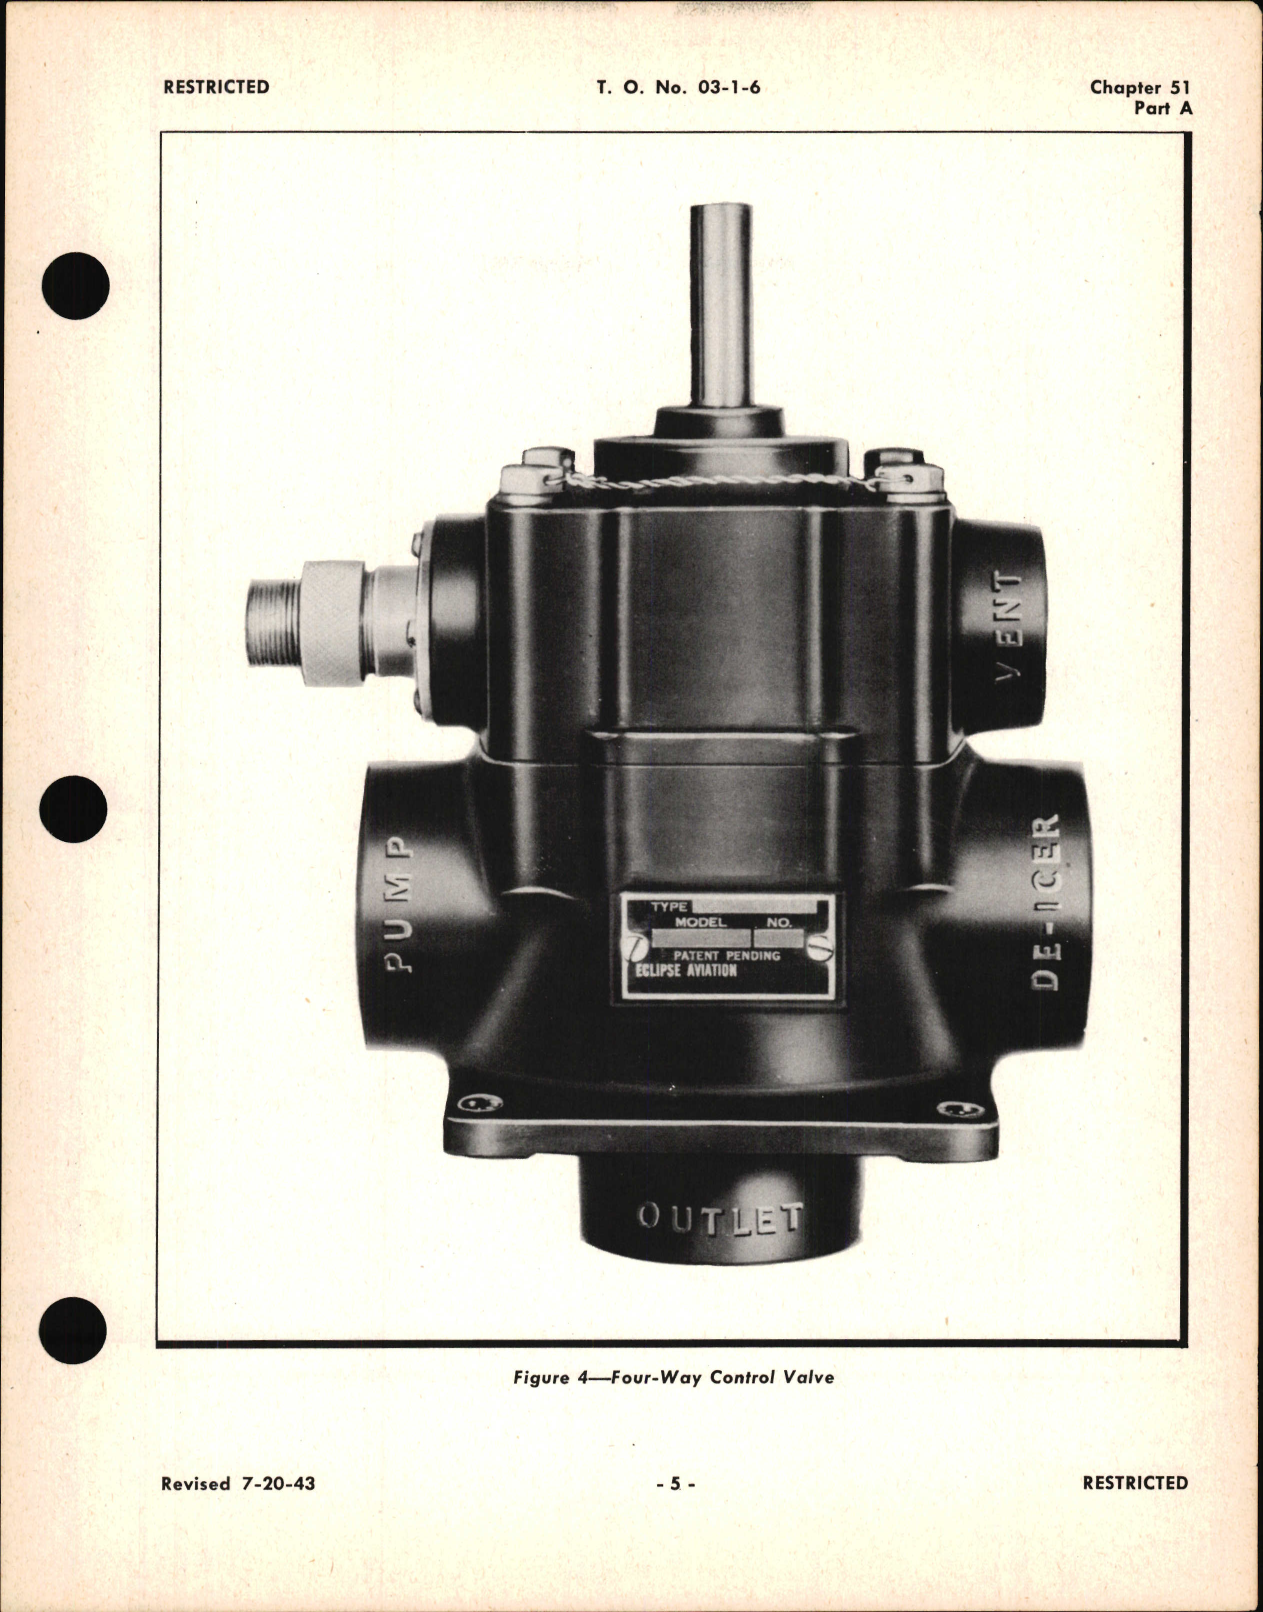 Sample page 5 from AirCorps Library document: Operation & Service Instructions for De-Icer Distributing Valves and 4-Way Control Valves, Ch 51 Part A